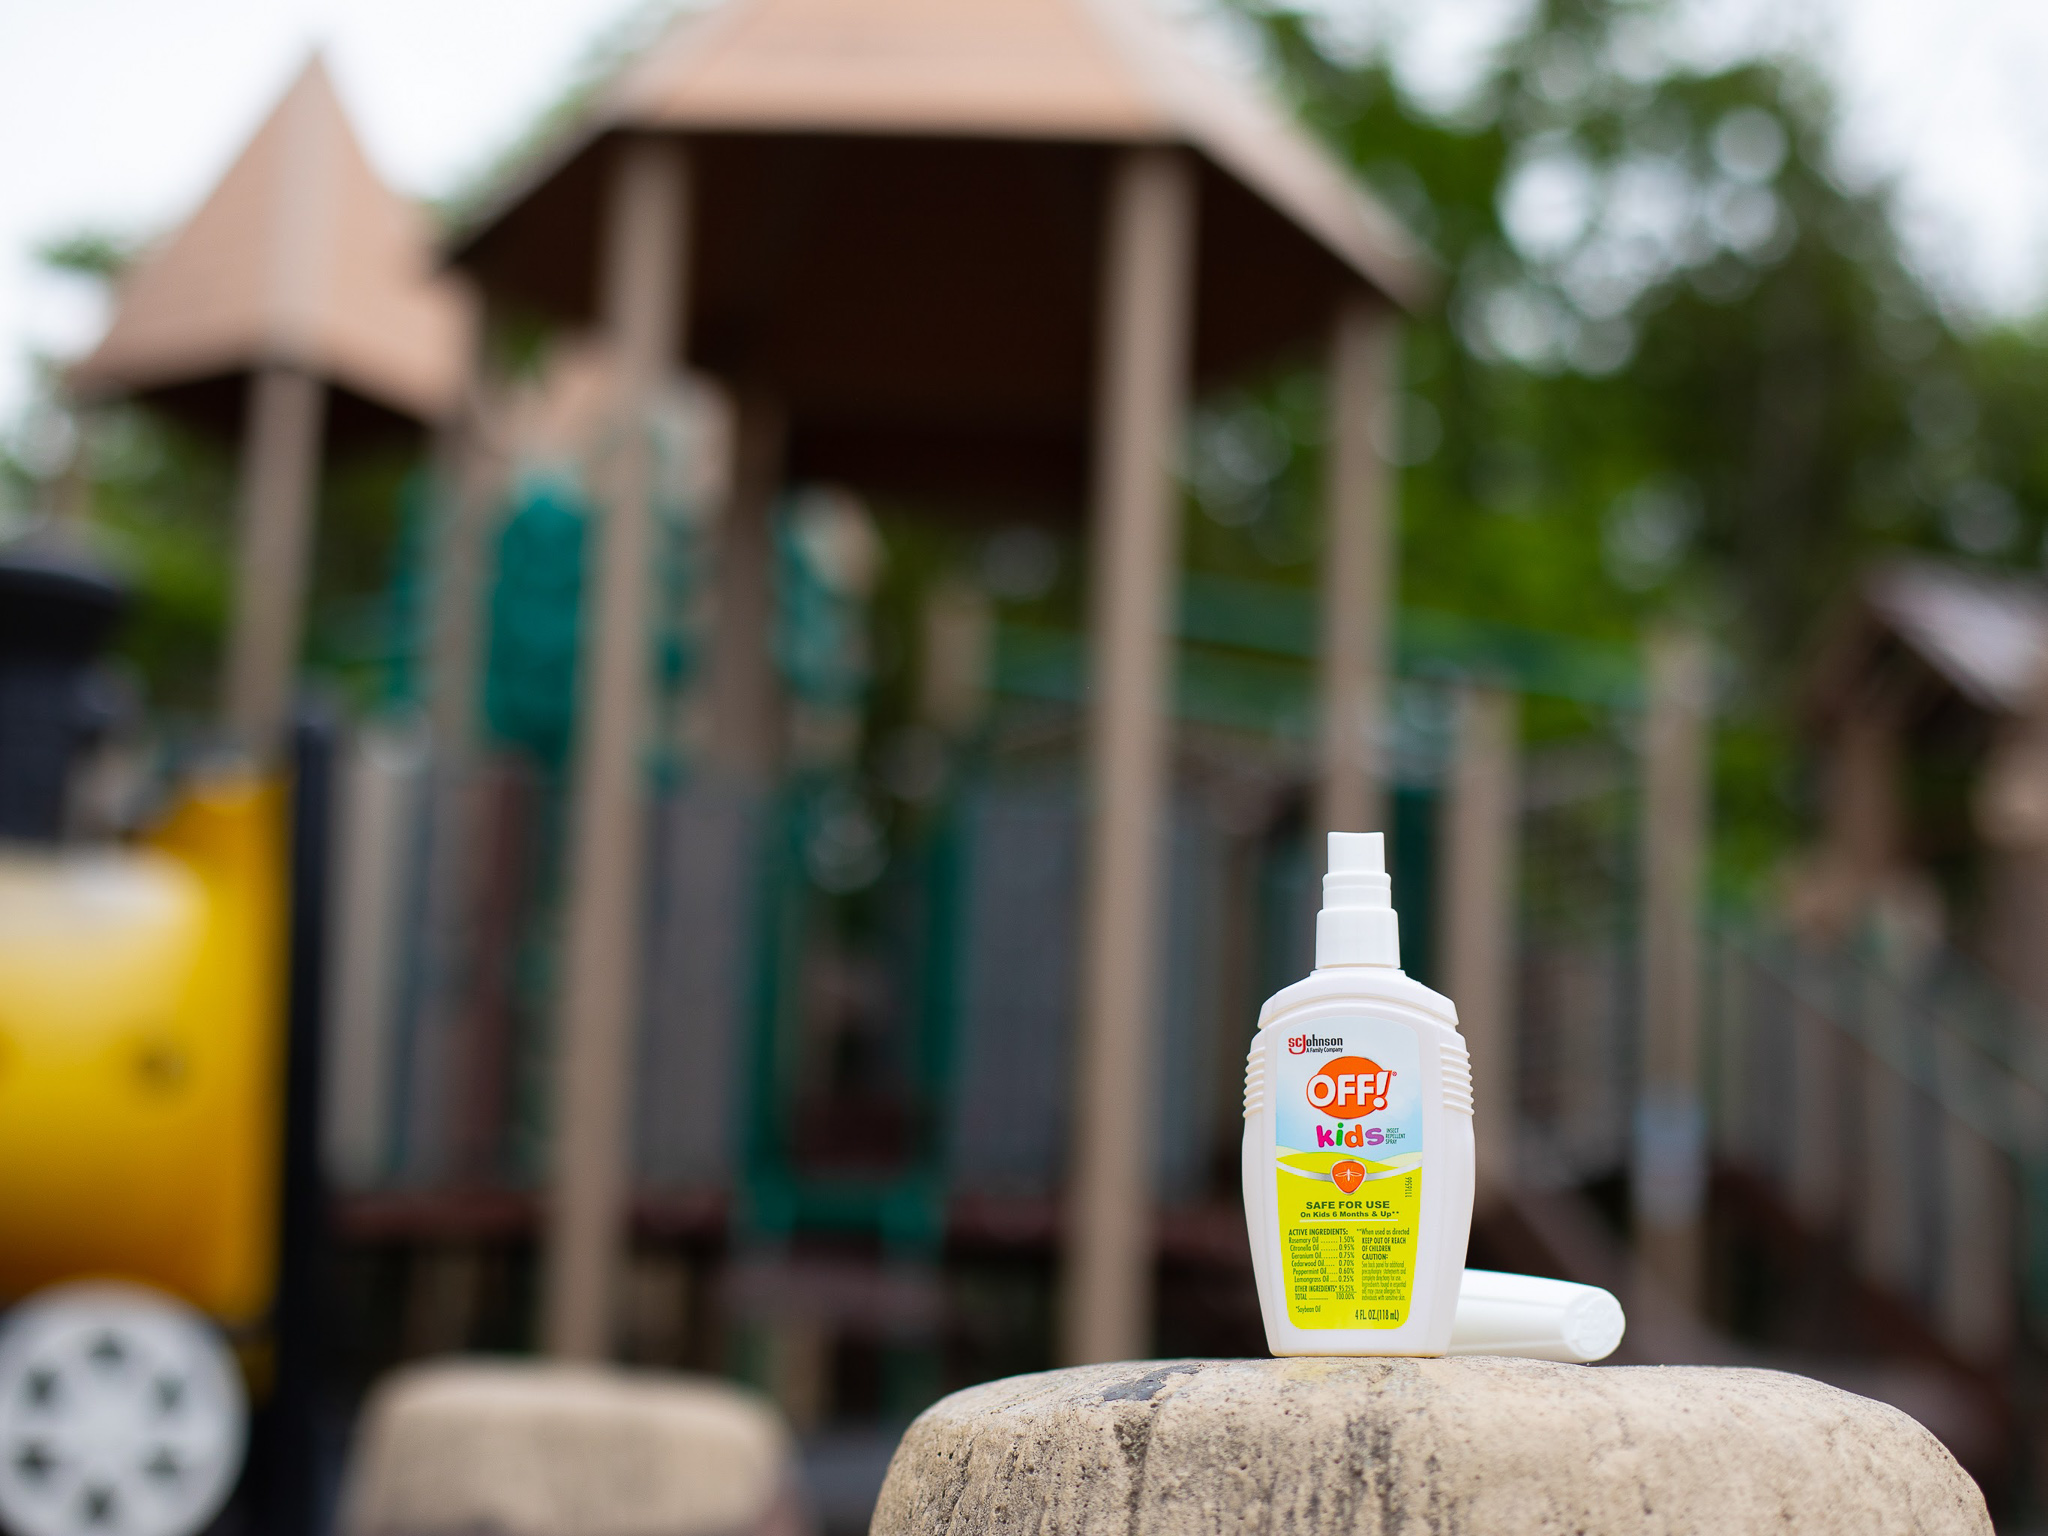 Enjoy Summer Fun & Get Great Protection With OFF!® Kids Mosquito Spray – Save NOW At Publix